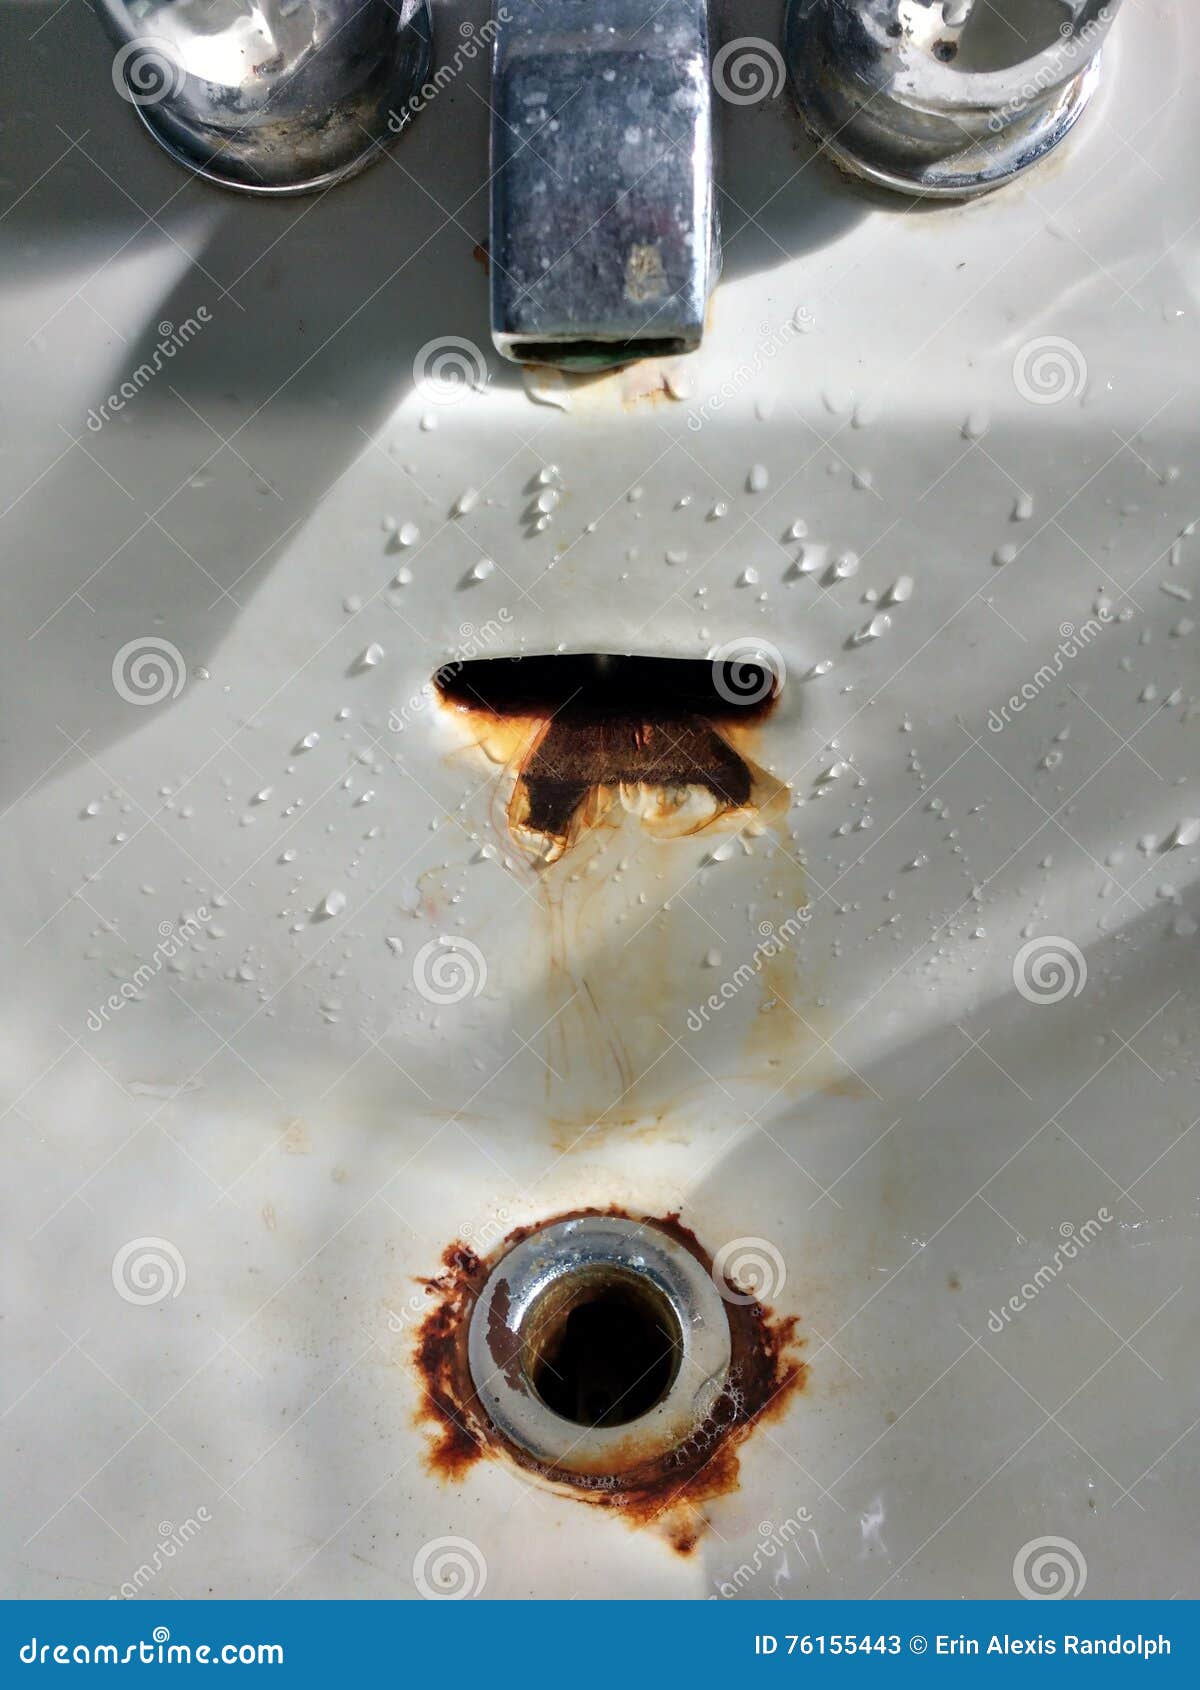 Faucet Dripping In A Porcelain Sink With Rusty Drain Stock